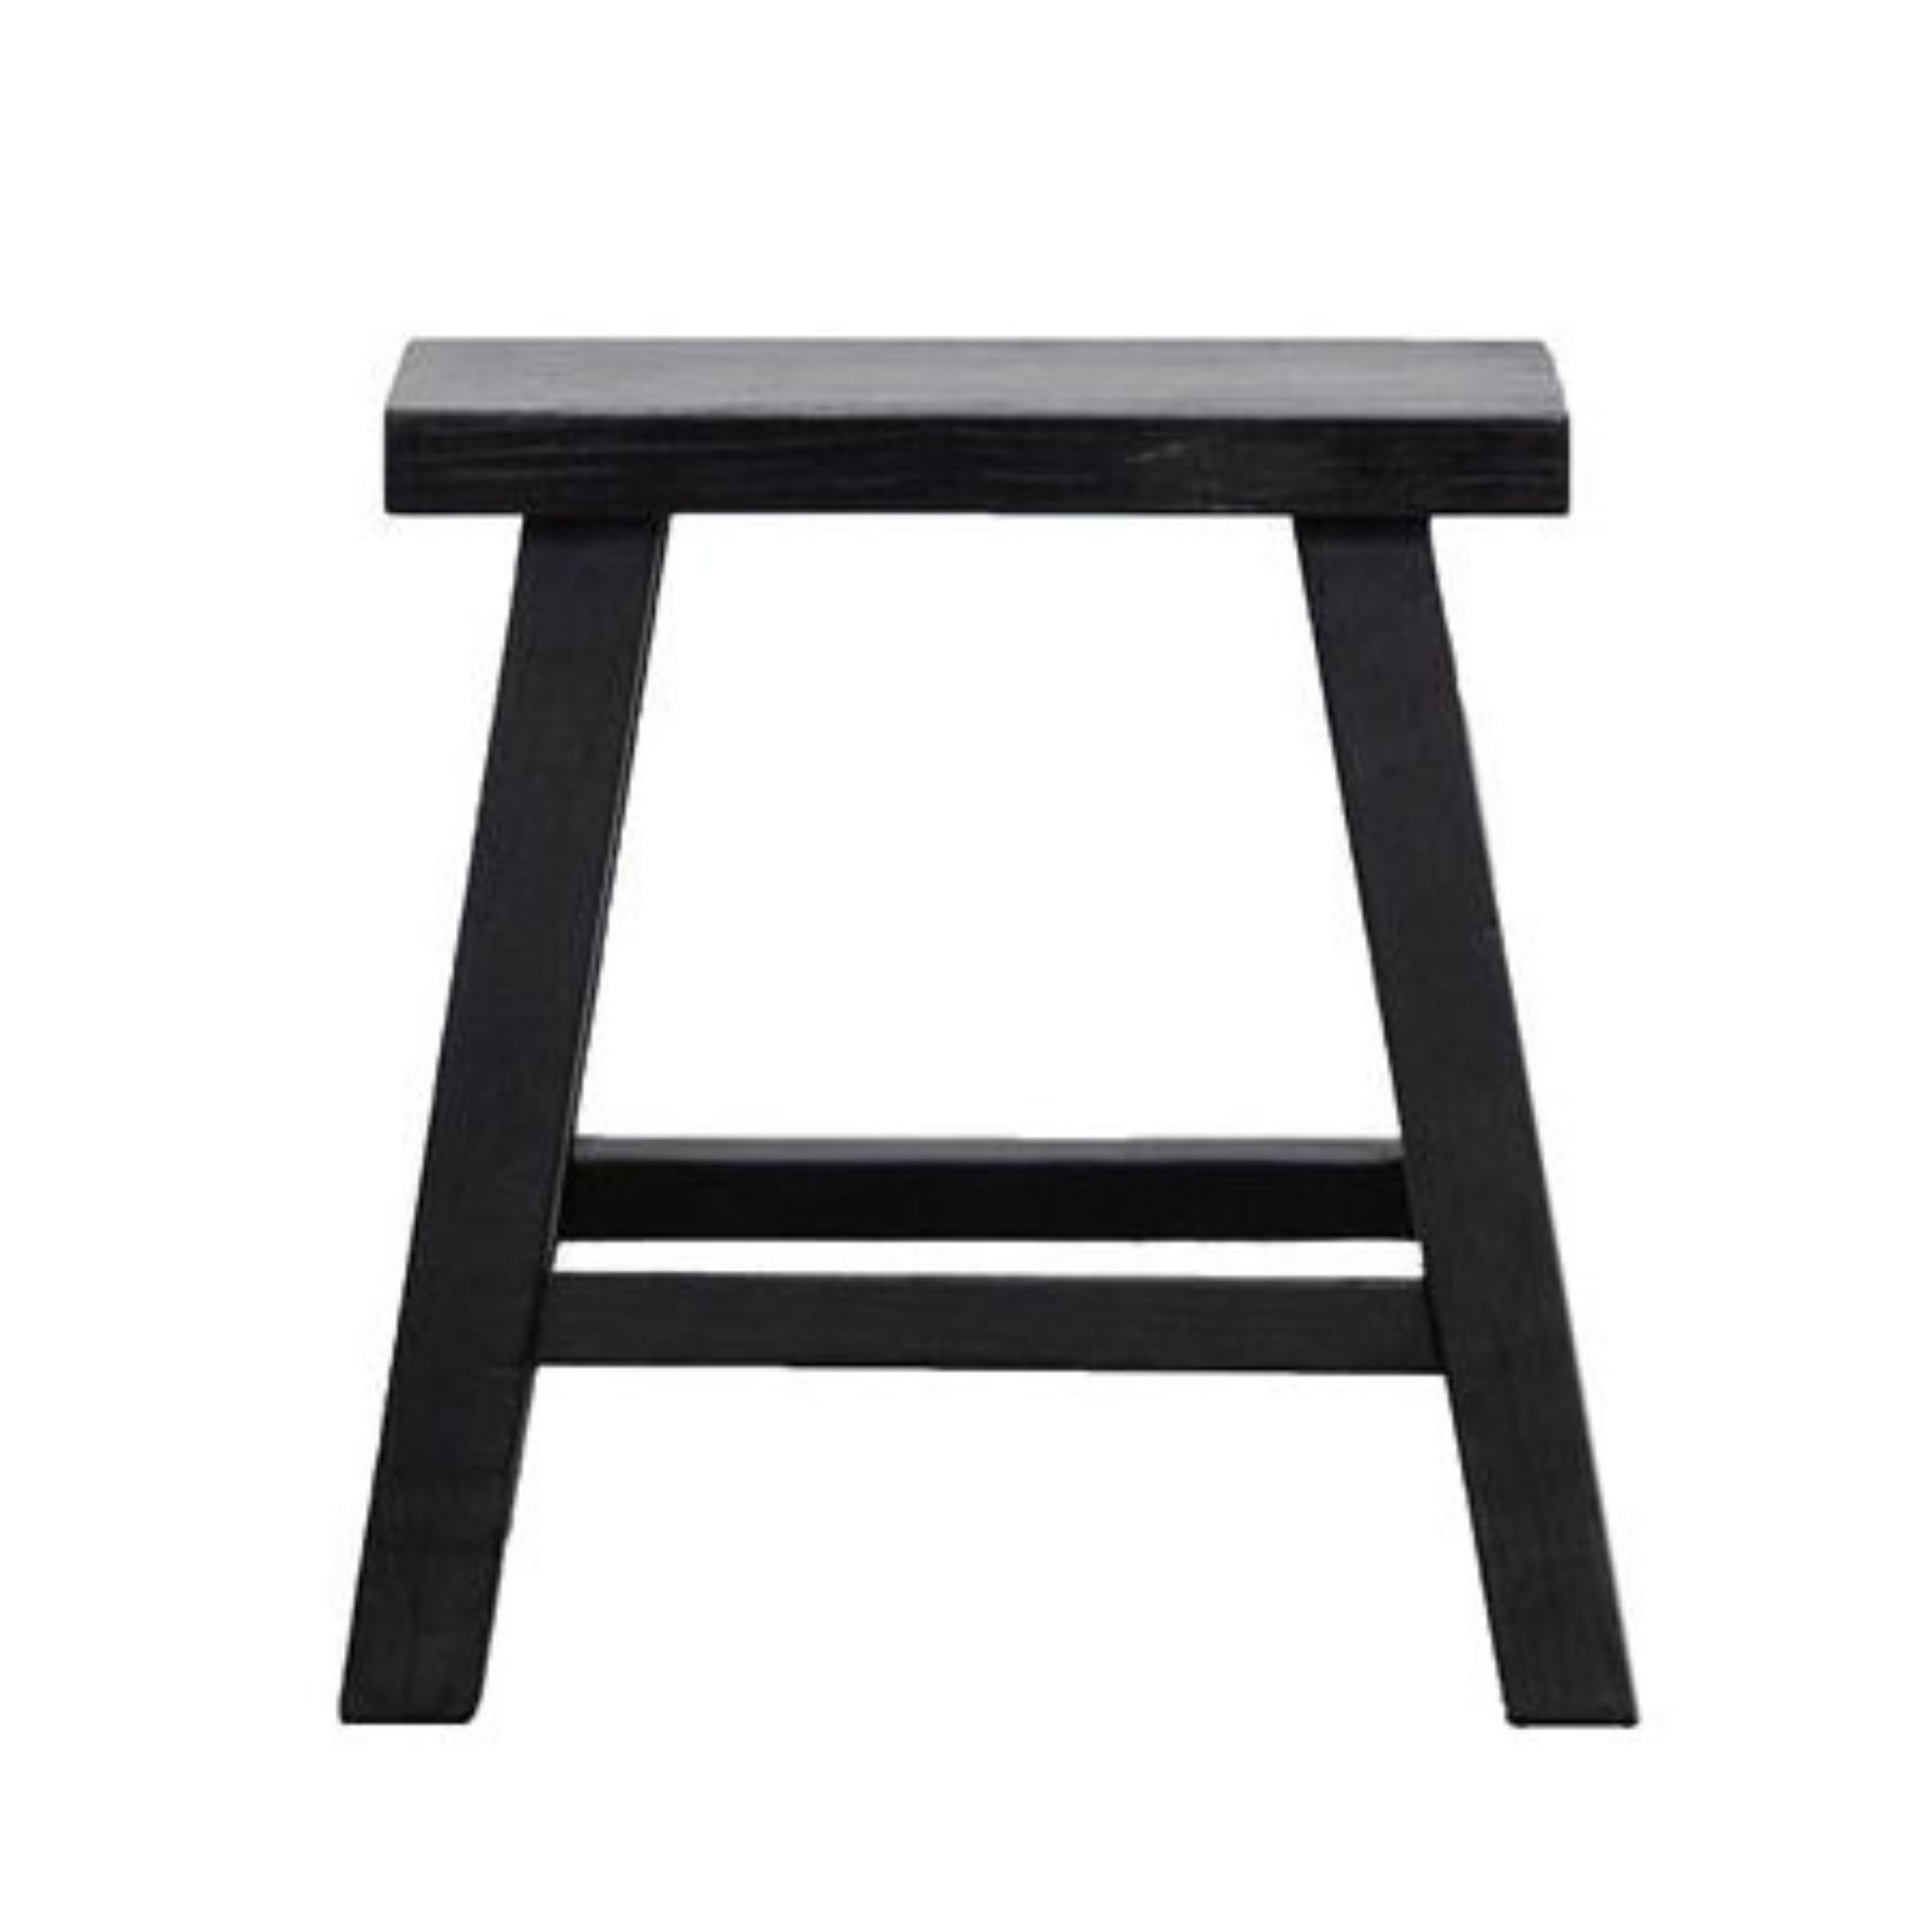 PARQ RECTANGLE STOOL | NATURAL OR BLACK